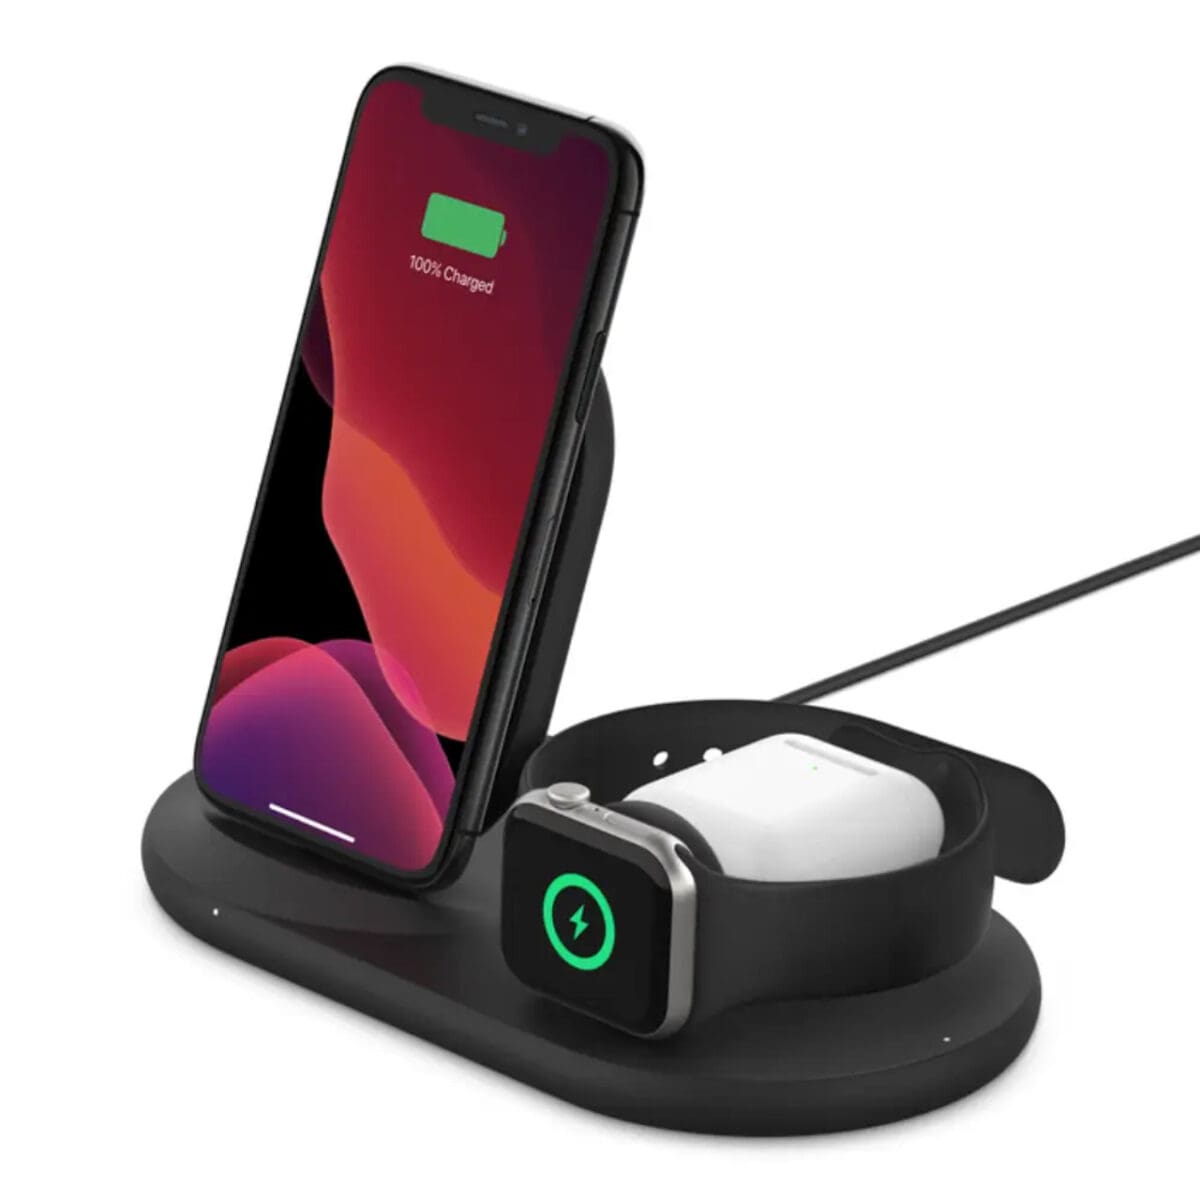 Belkin BoostCharge 3-in-1 Wireless Charger for Apple Devices (WIZ001MYBK)